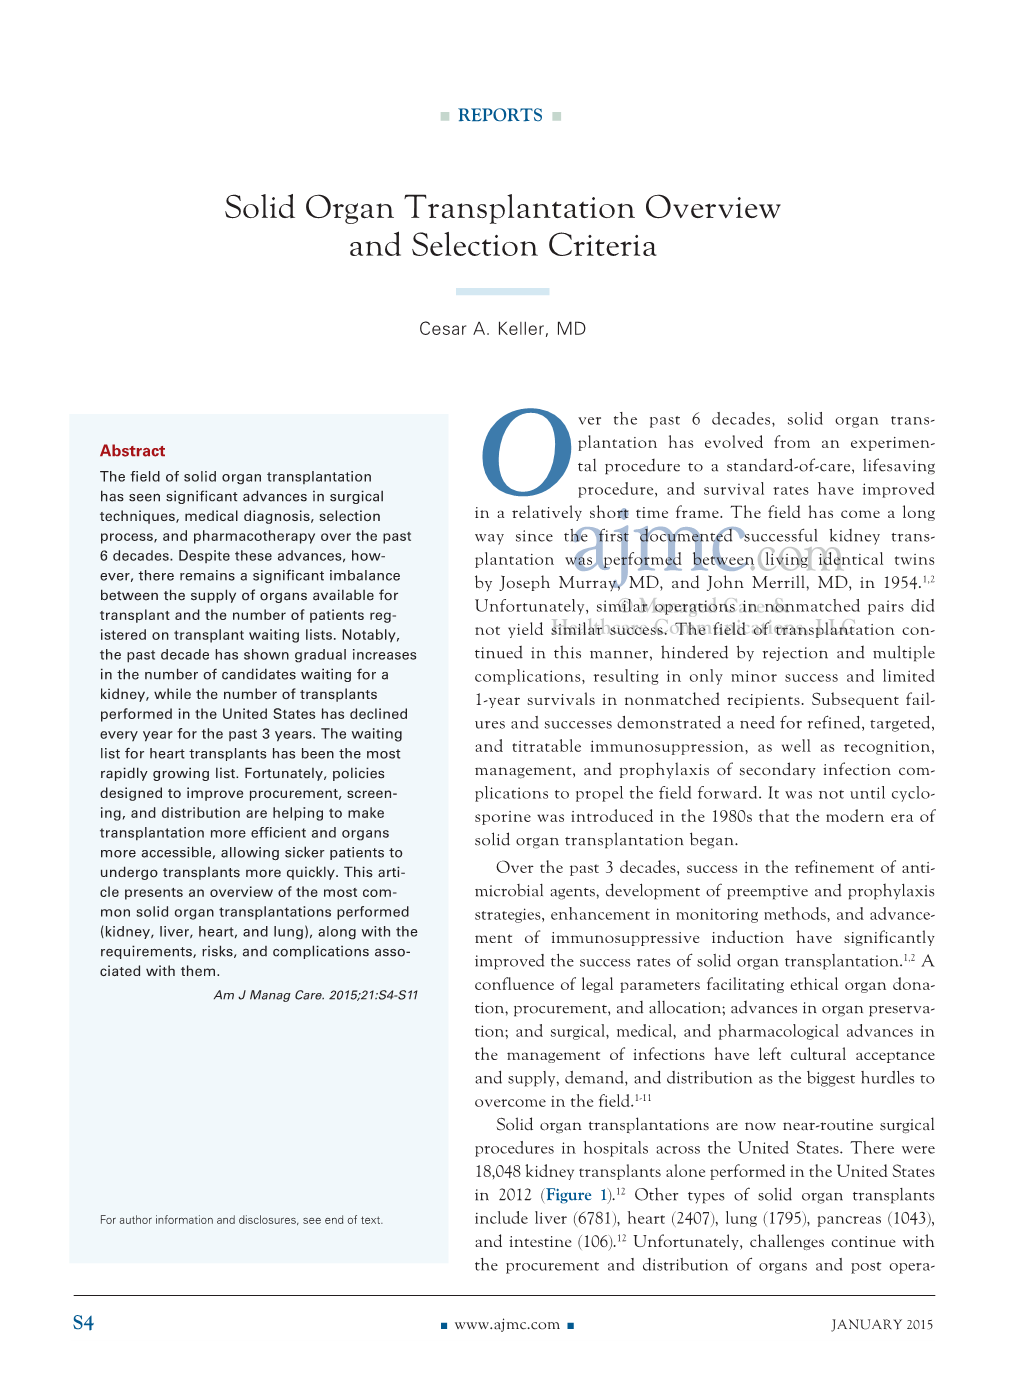 Solid Organ Transplantation Overview and Selection Criteria